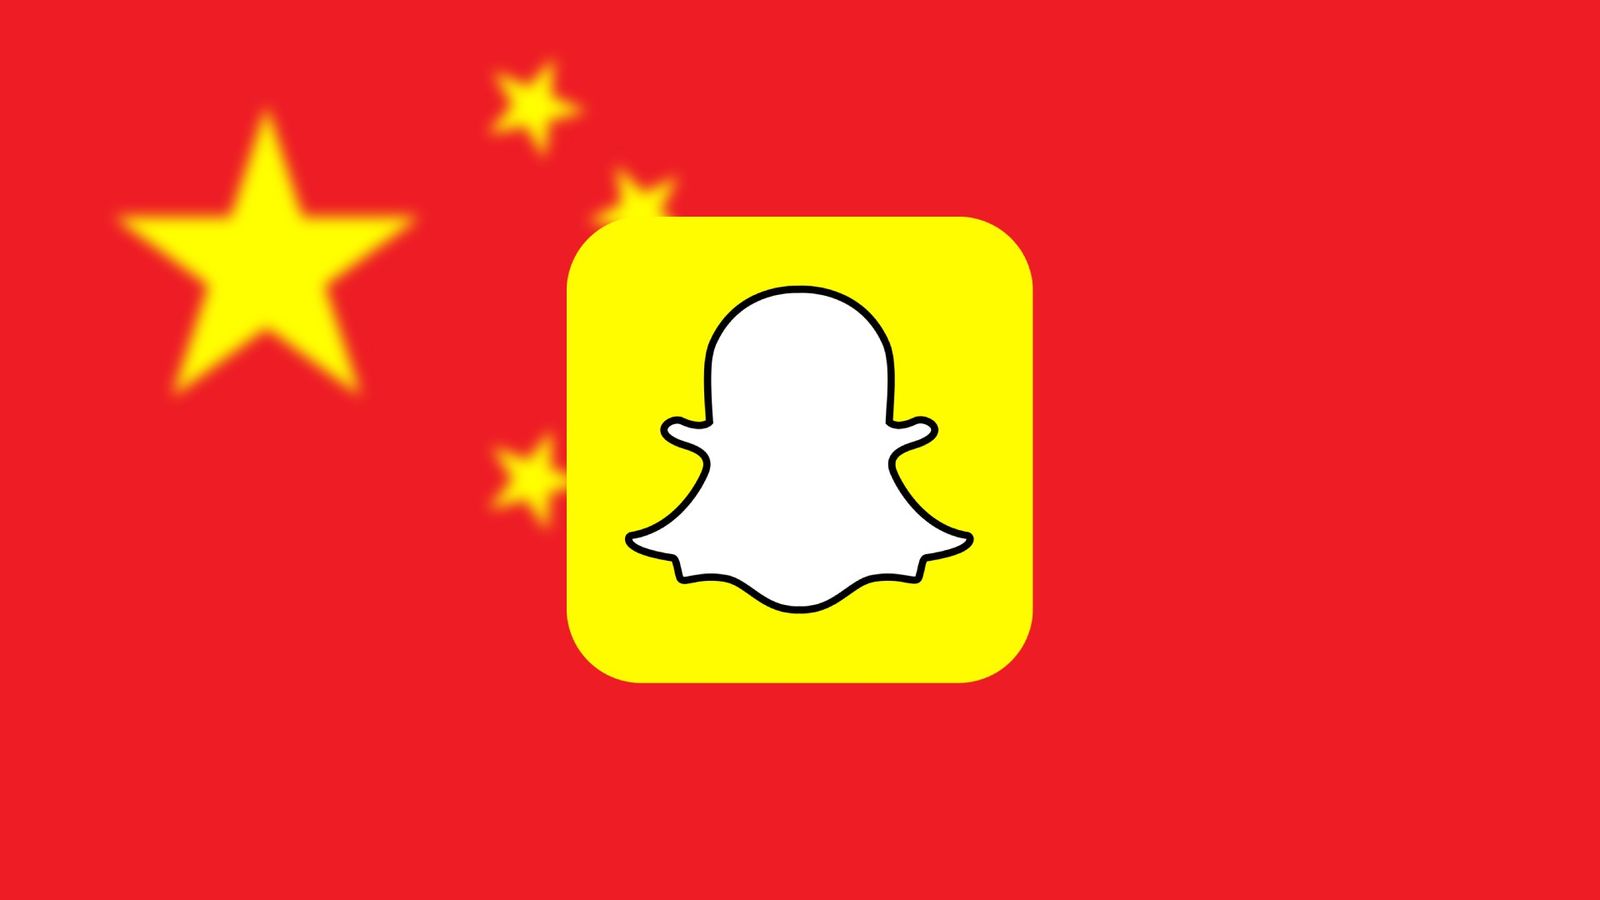 An image of the Snapchat logo and the Chinese flag - Does China own Snapchat?